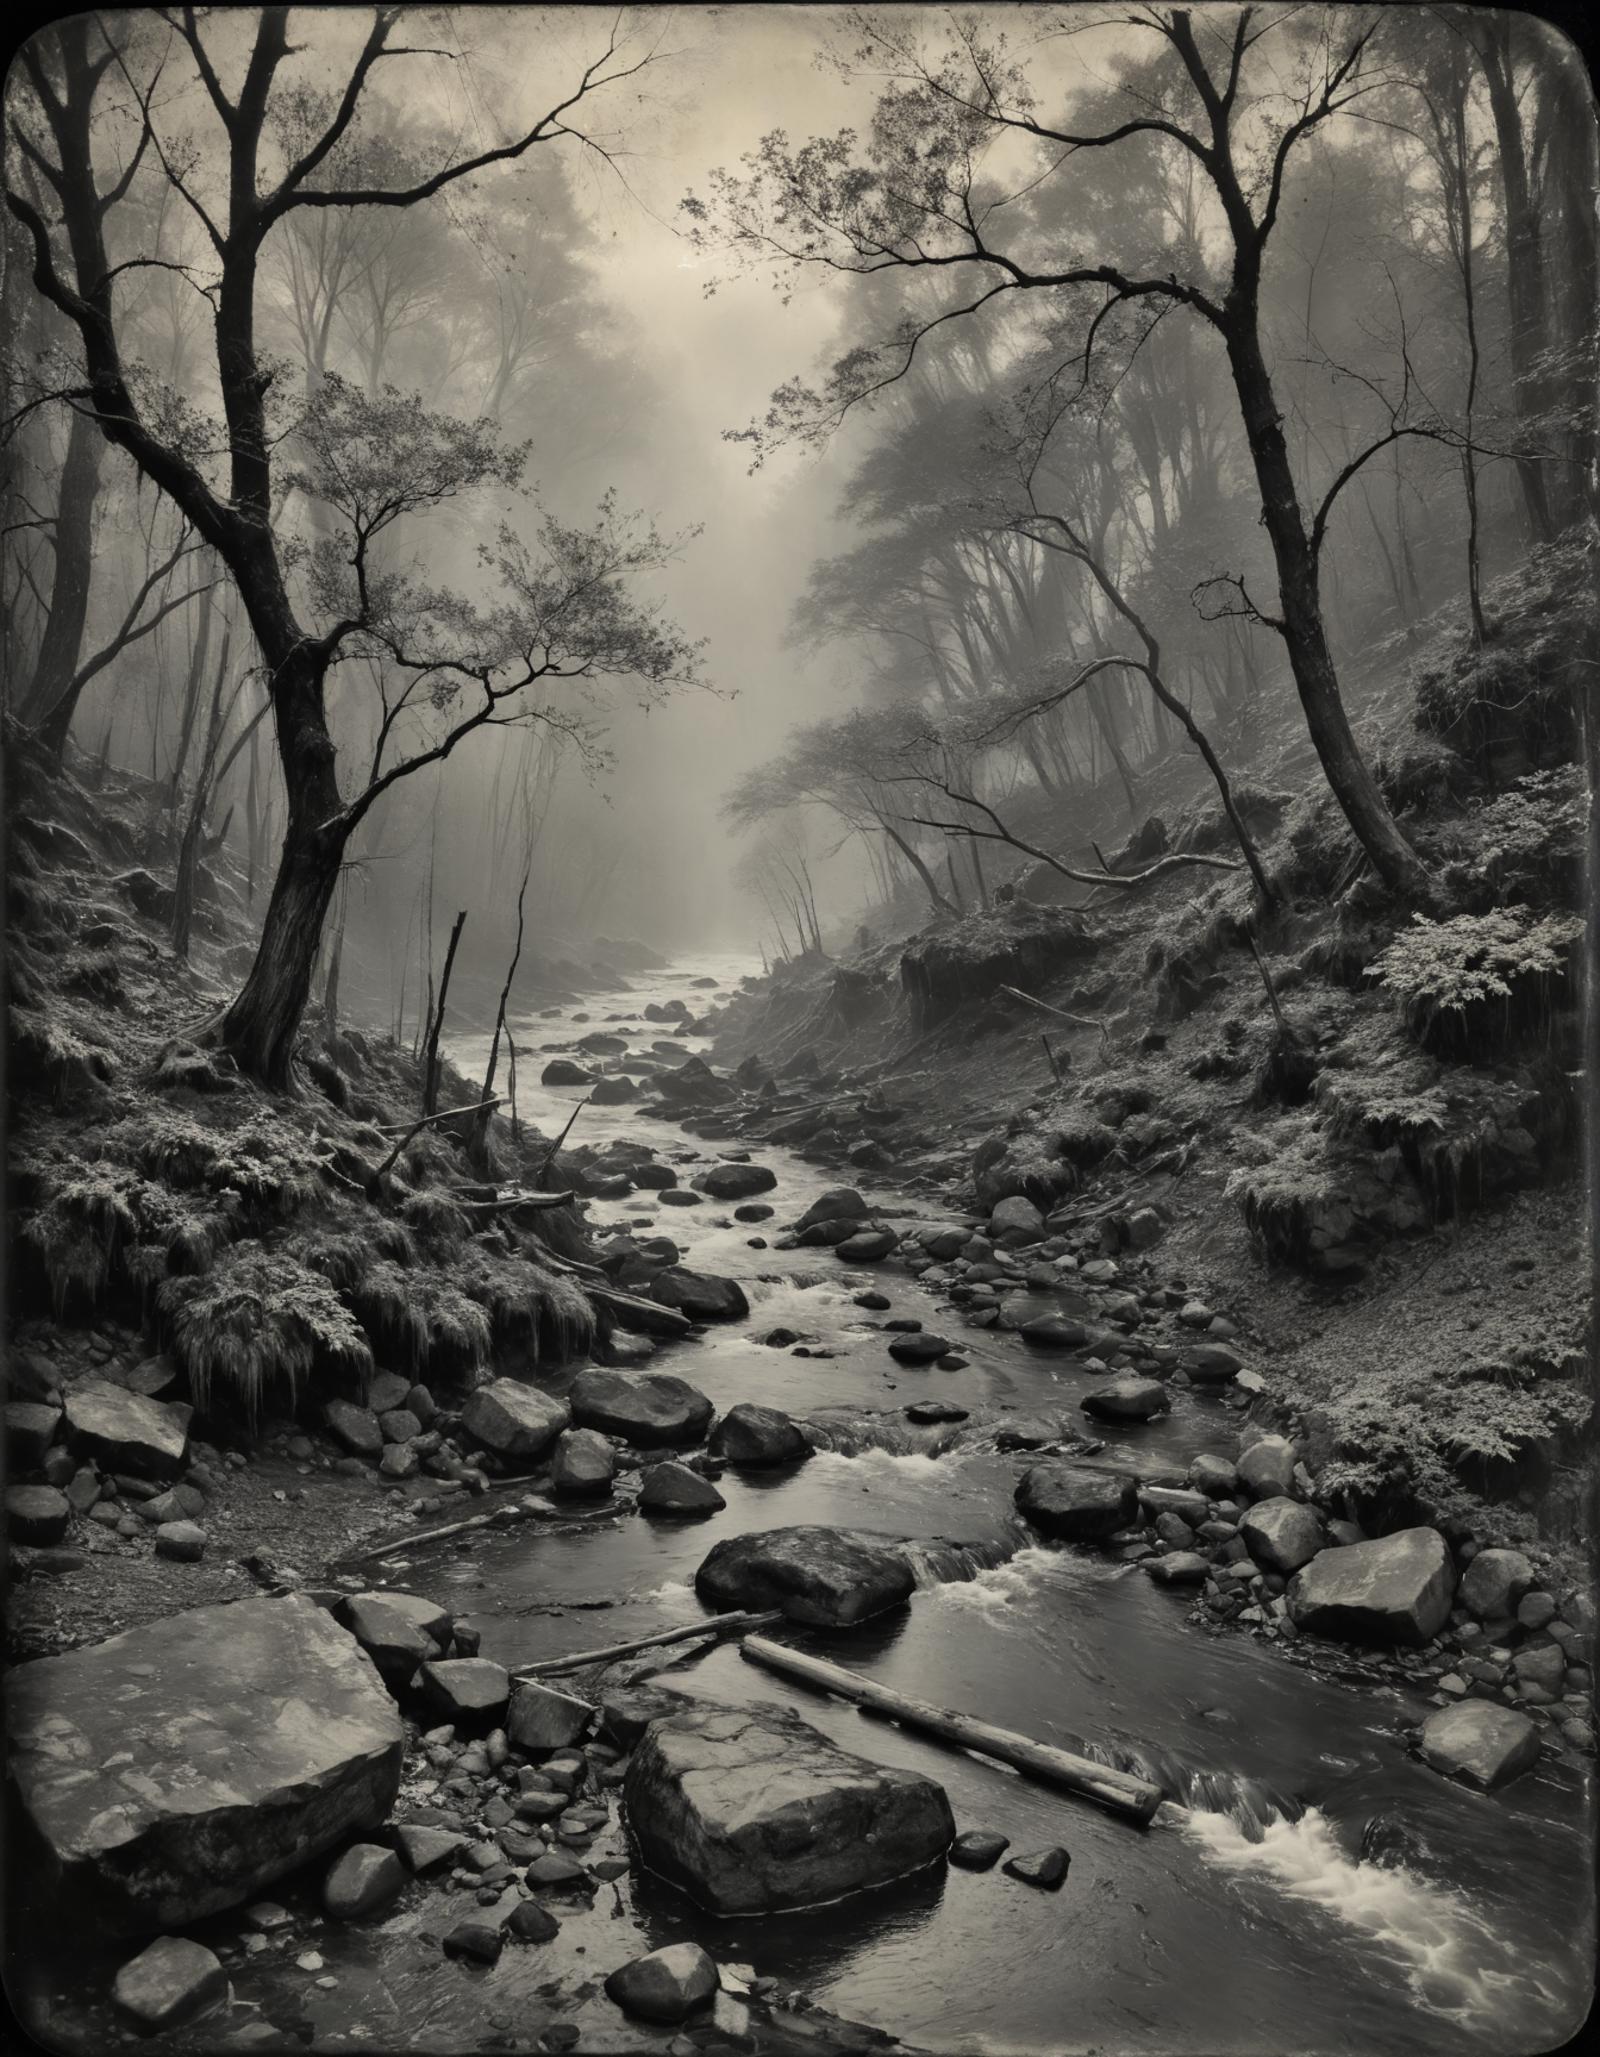 A black and white forest scene with a river full of rocks and branches.